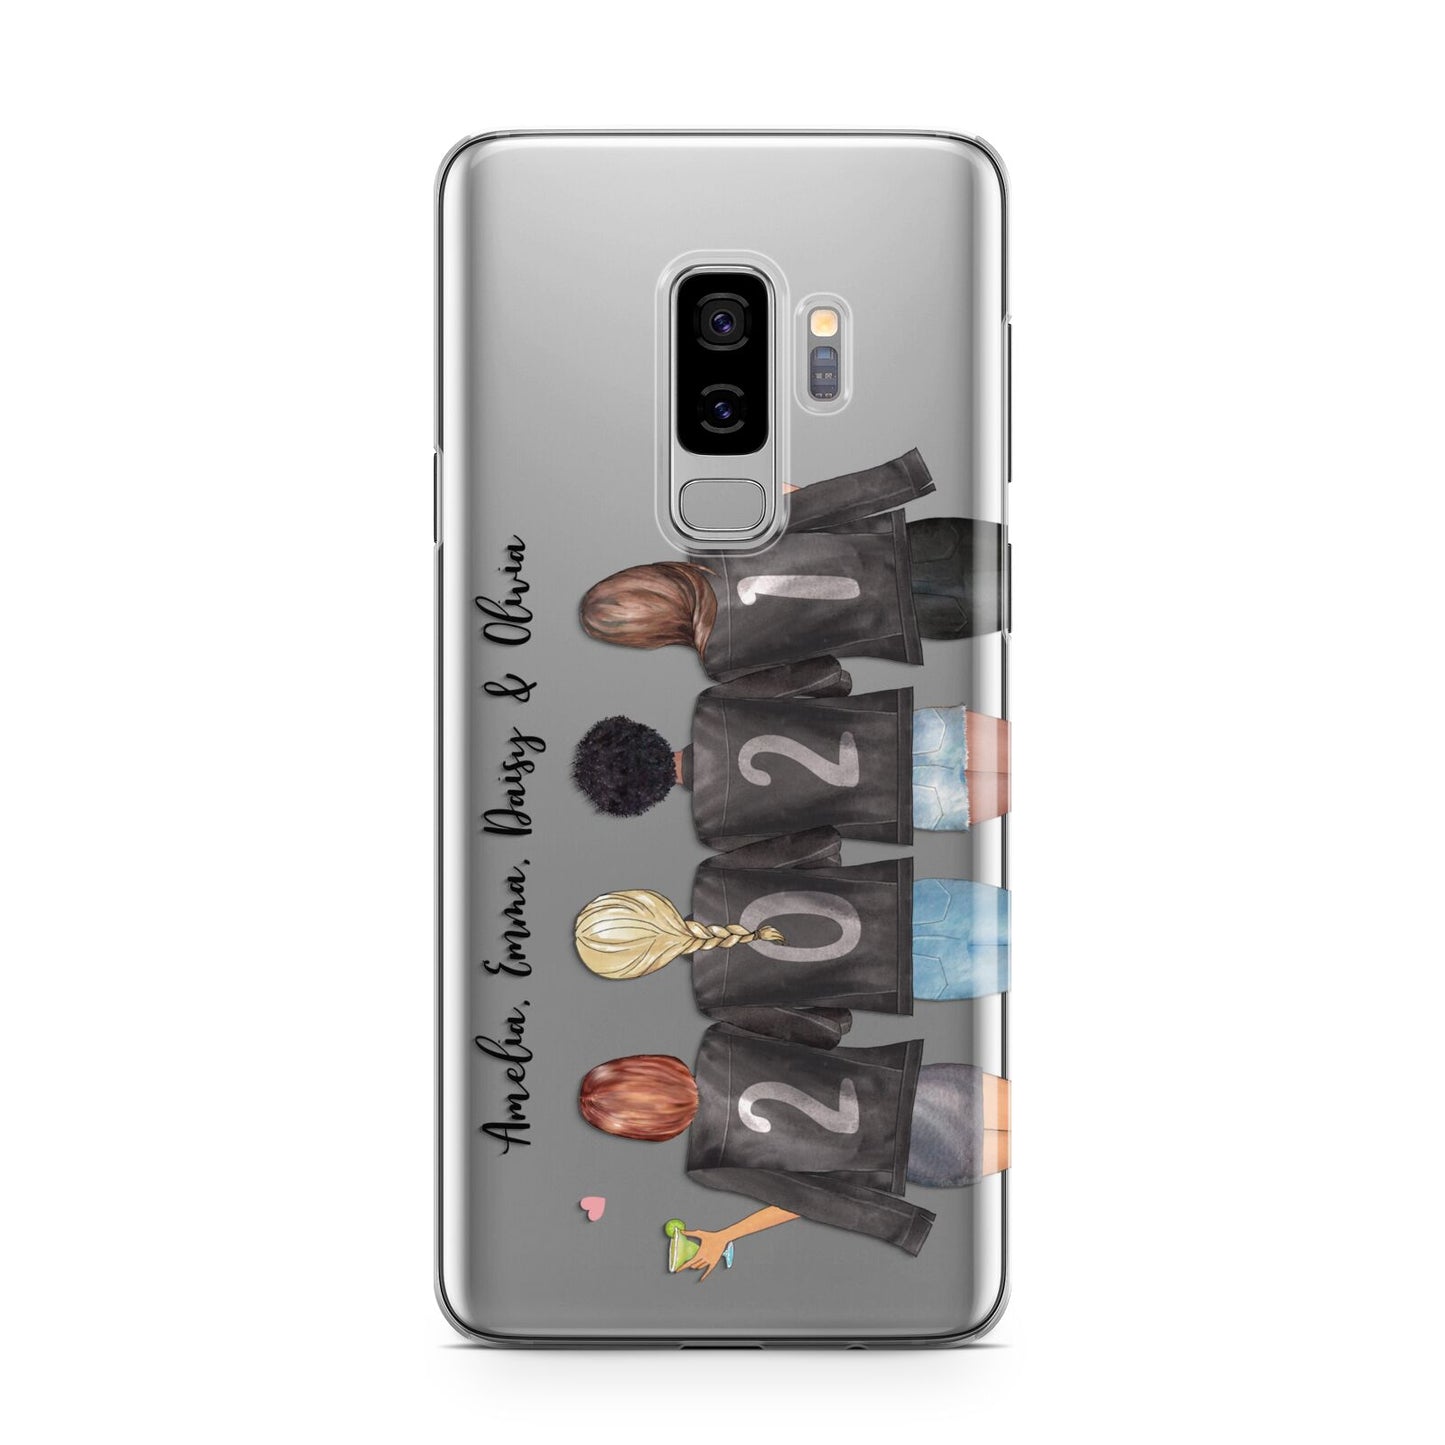 4 Best Friends with Names Samsung Galaxy S9 Plus Case on Silver phone